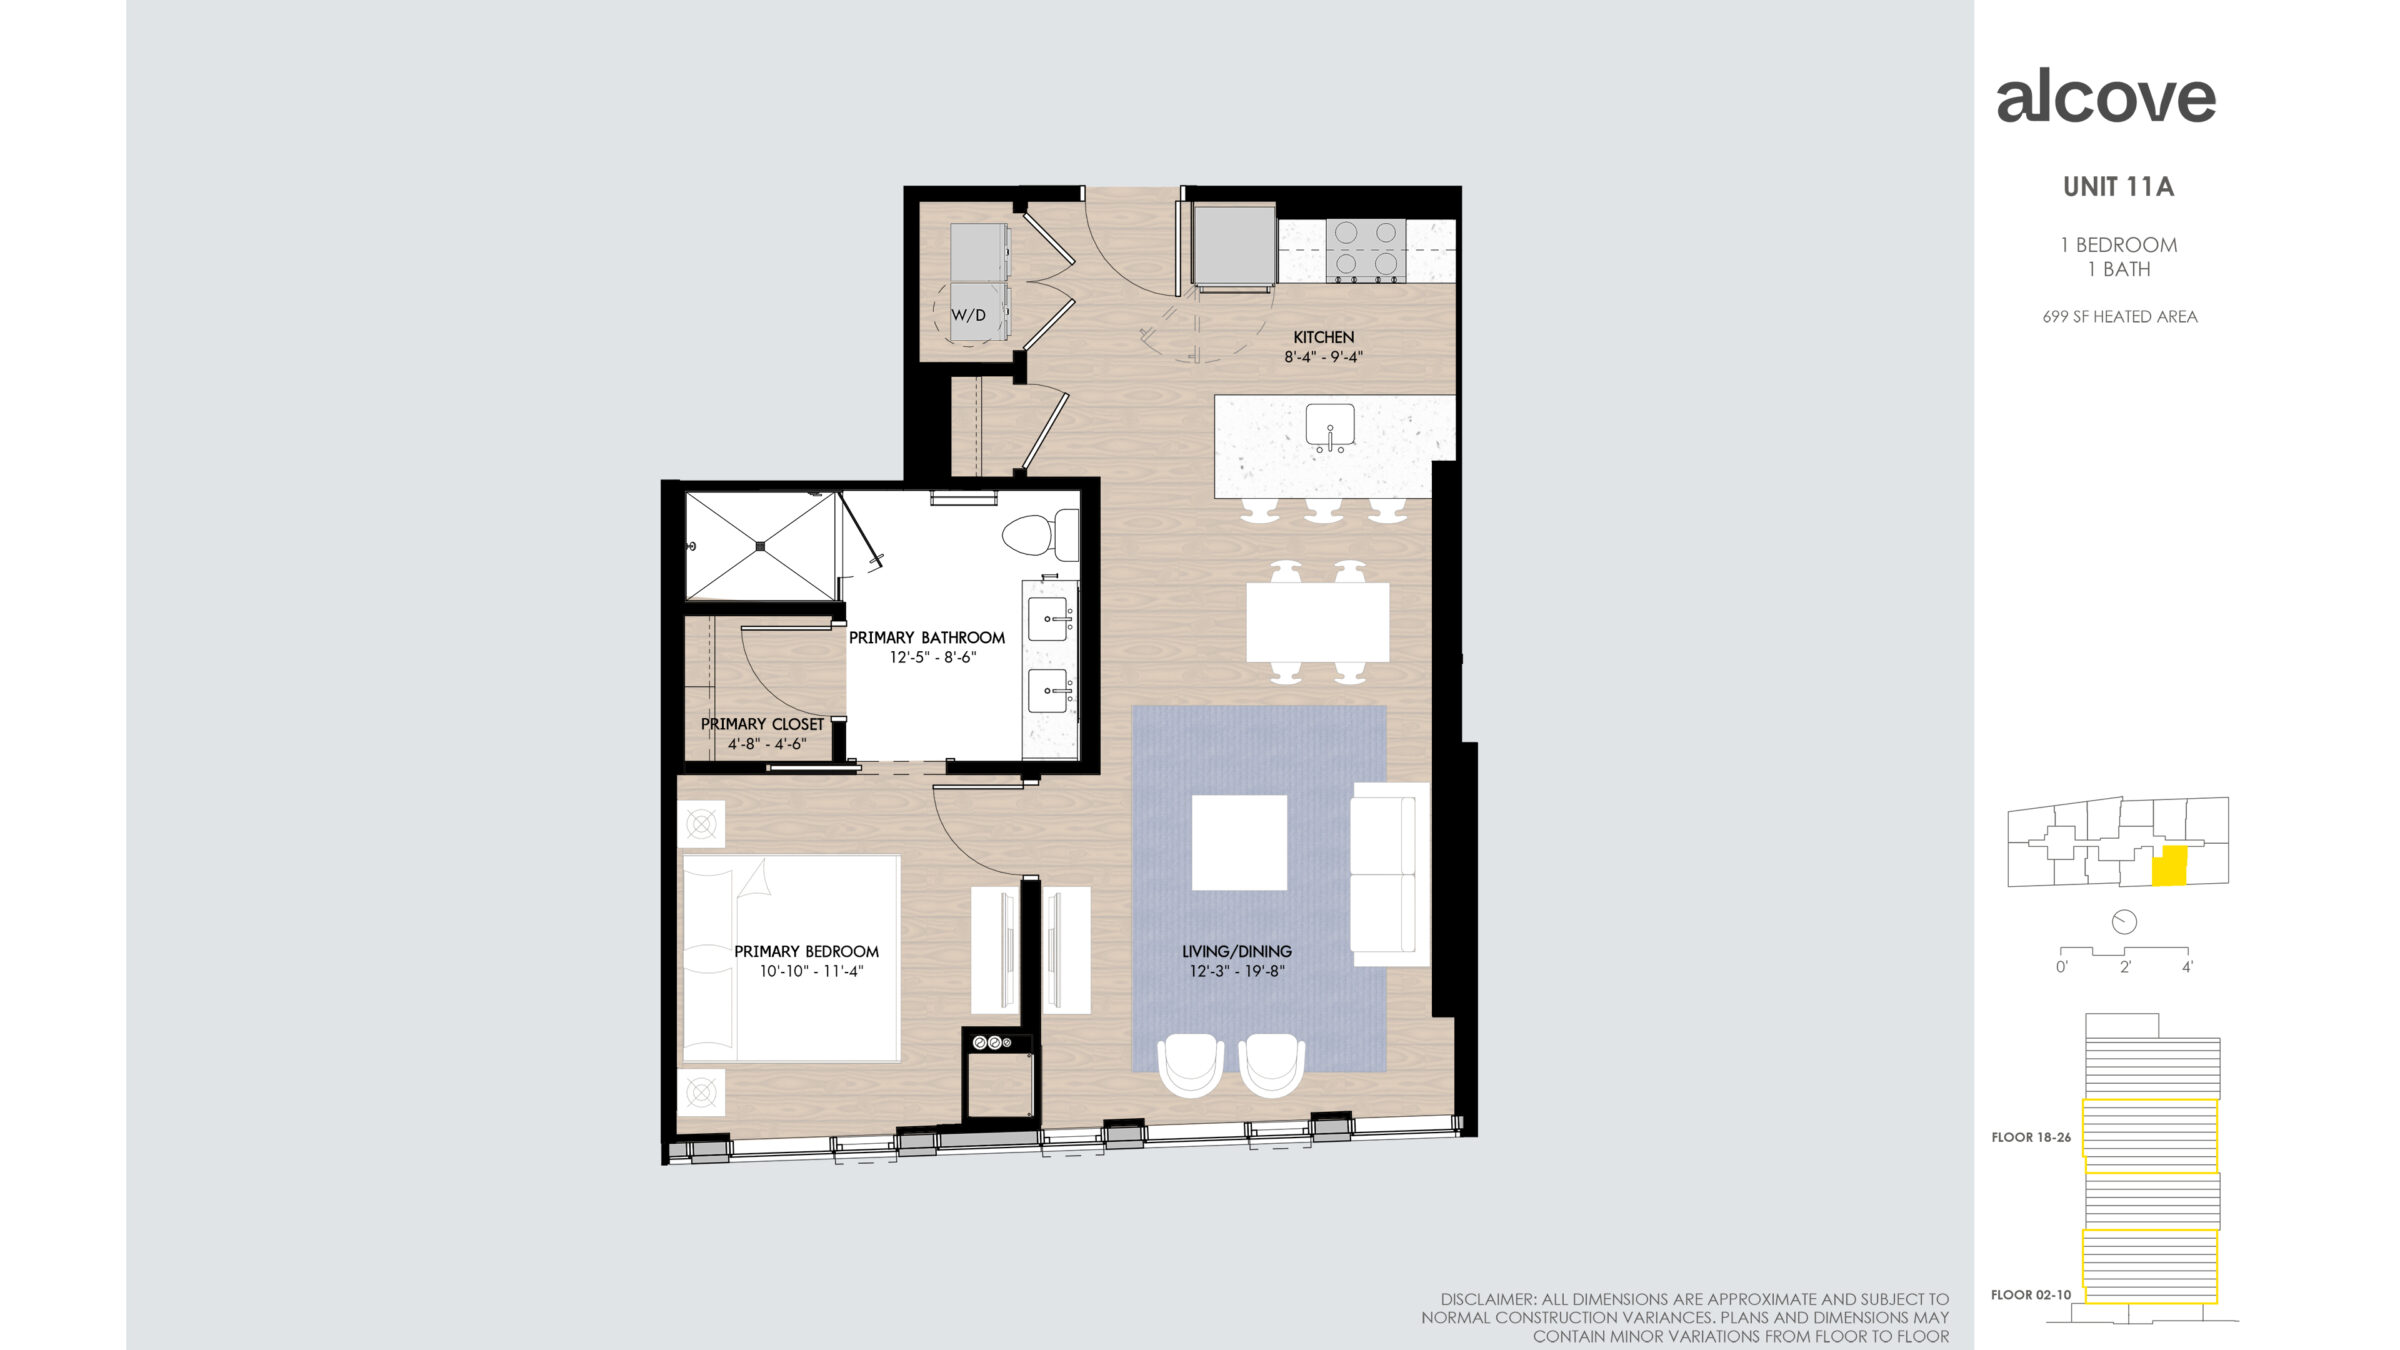 UNIT 11A 1 BEDROOM 1 BATH 699 SF HEATED AREA Floor 18-26 floor 02-10 Disclaimer: all dimensions are approximate and subject to normal construction variances. Plans and dimensions may contain minor variations from floor to floor.